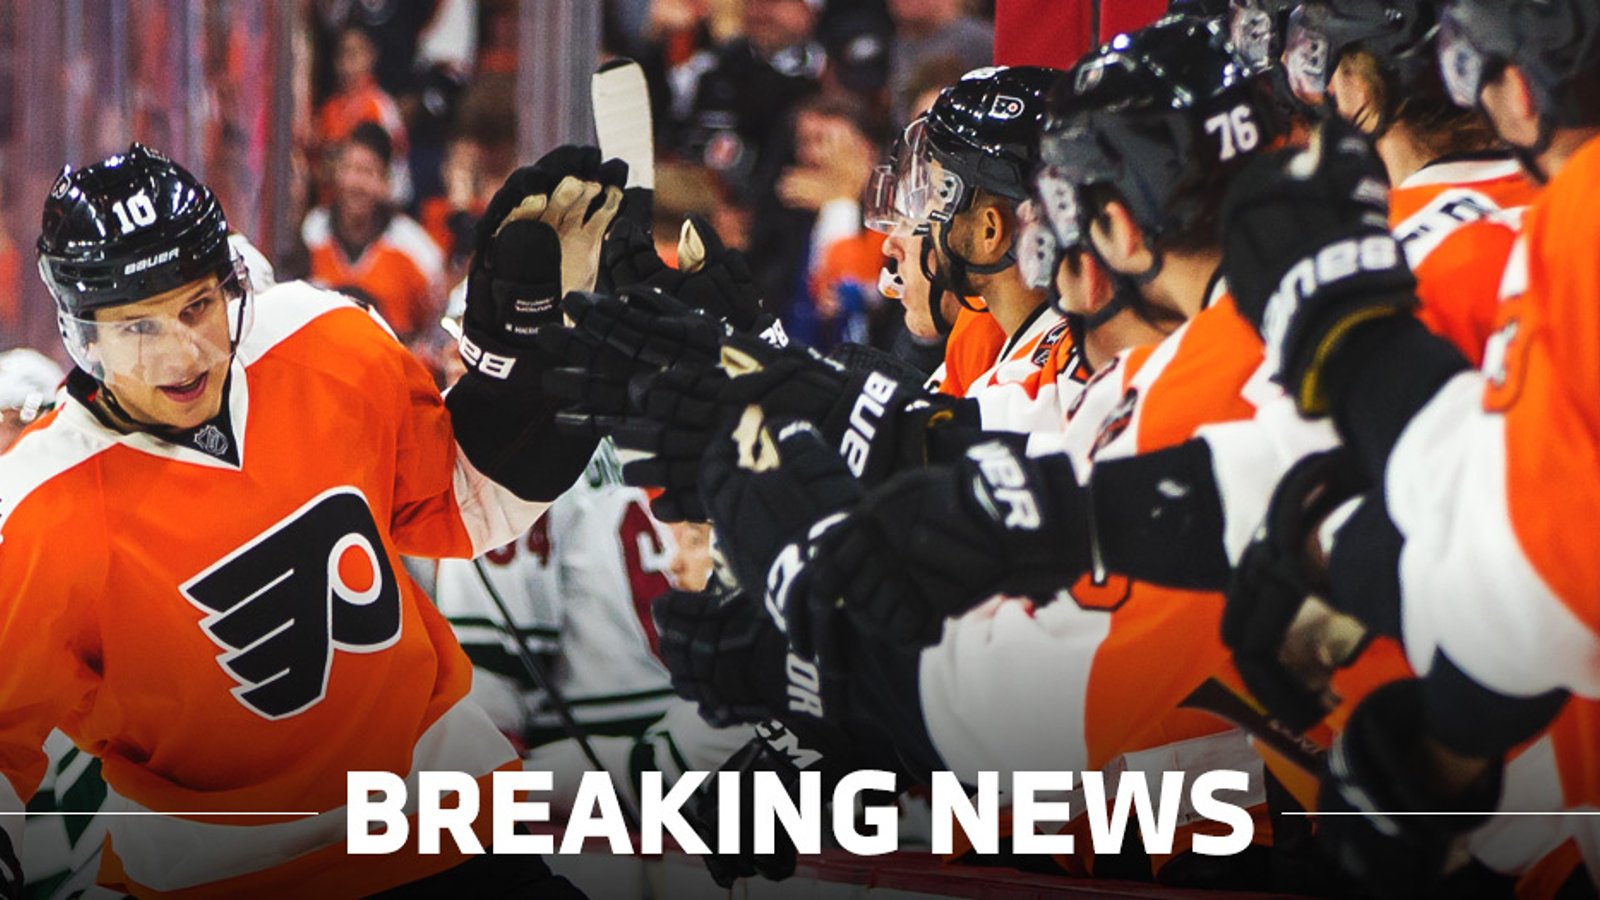 BREAKING: AHL player to step in for injured Flyer.